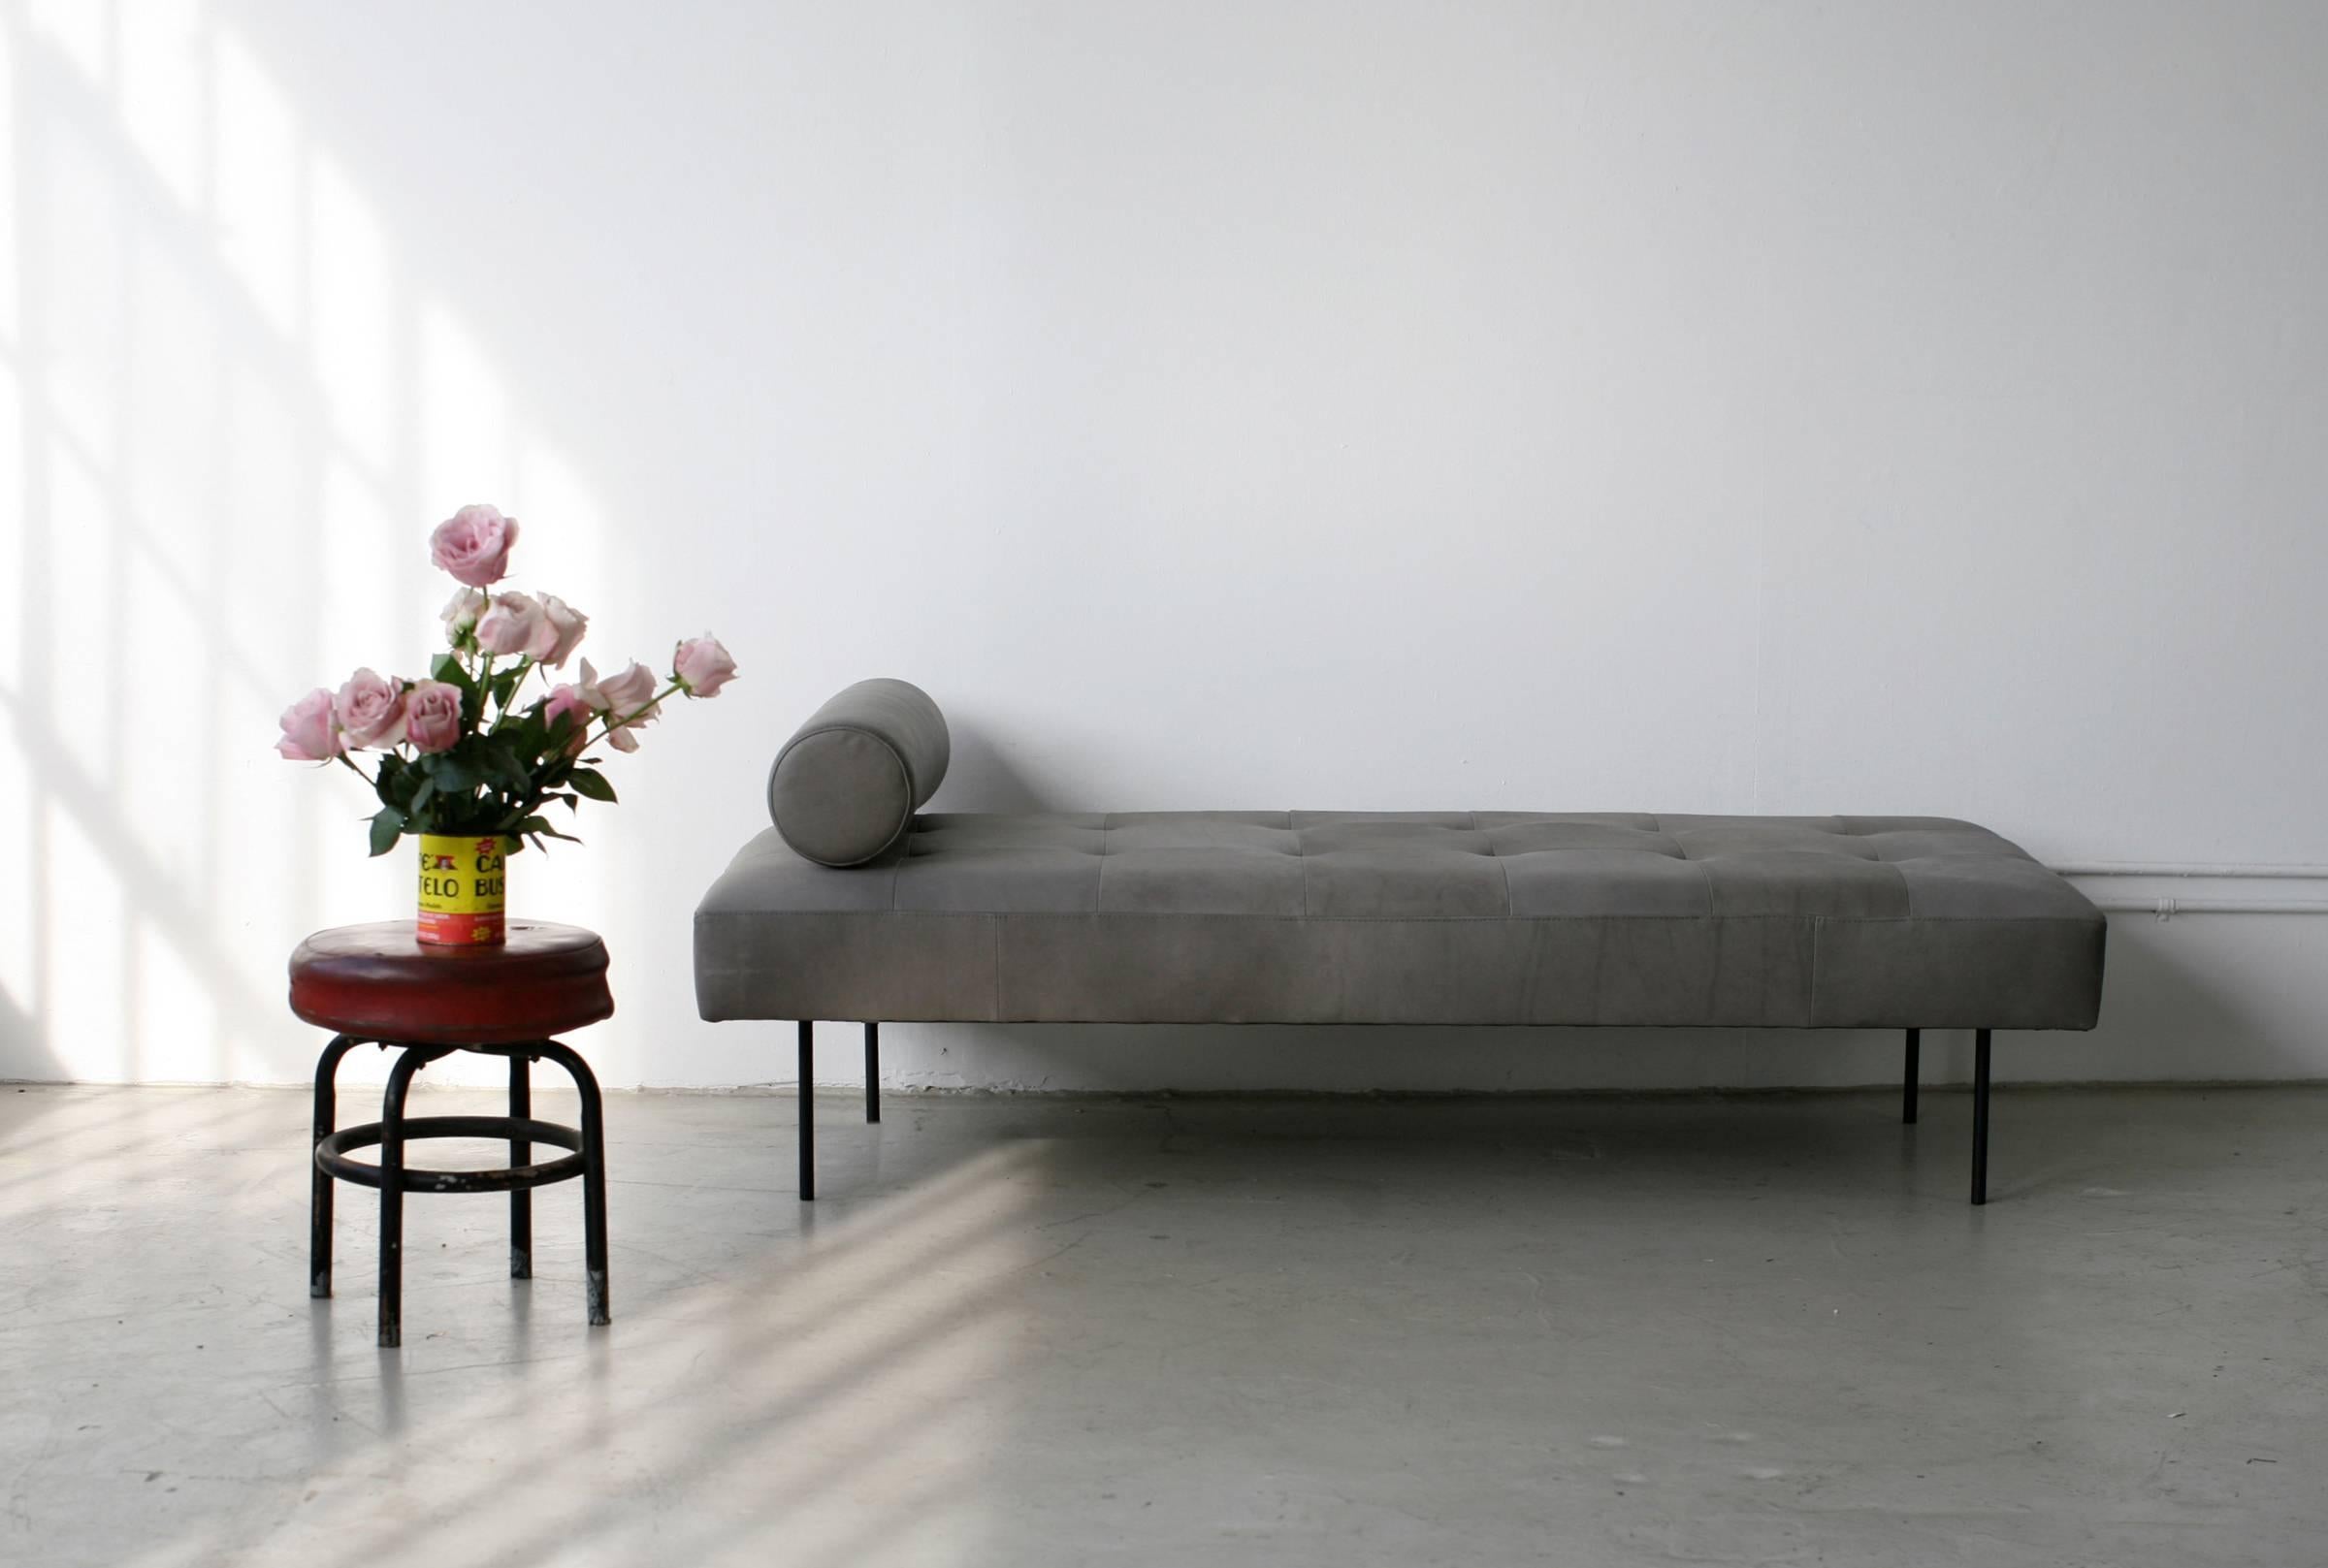 Smaller than a sofa, but bigger than a bench, the Goddard daybed functions as both when needed. It takes its form from 1950s French Industrial design, maintaining a sense of lightness and geometry. With a removable bolster and powder-coated steel